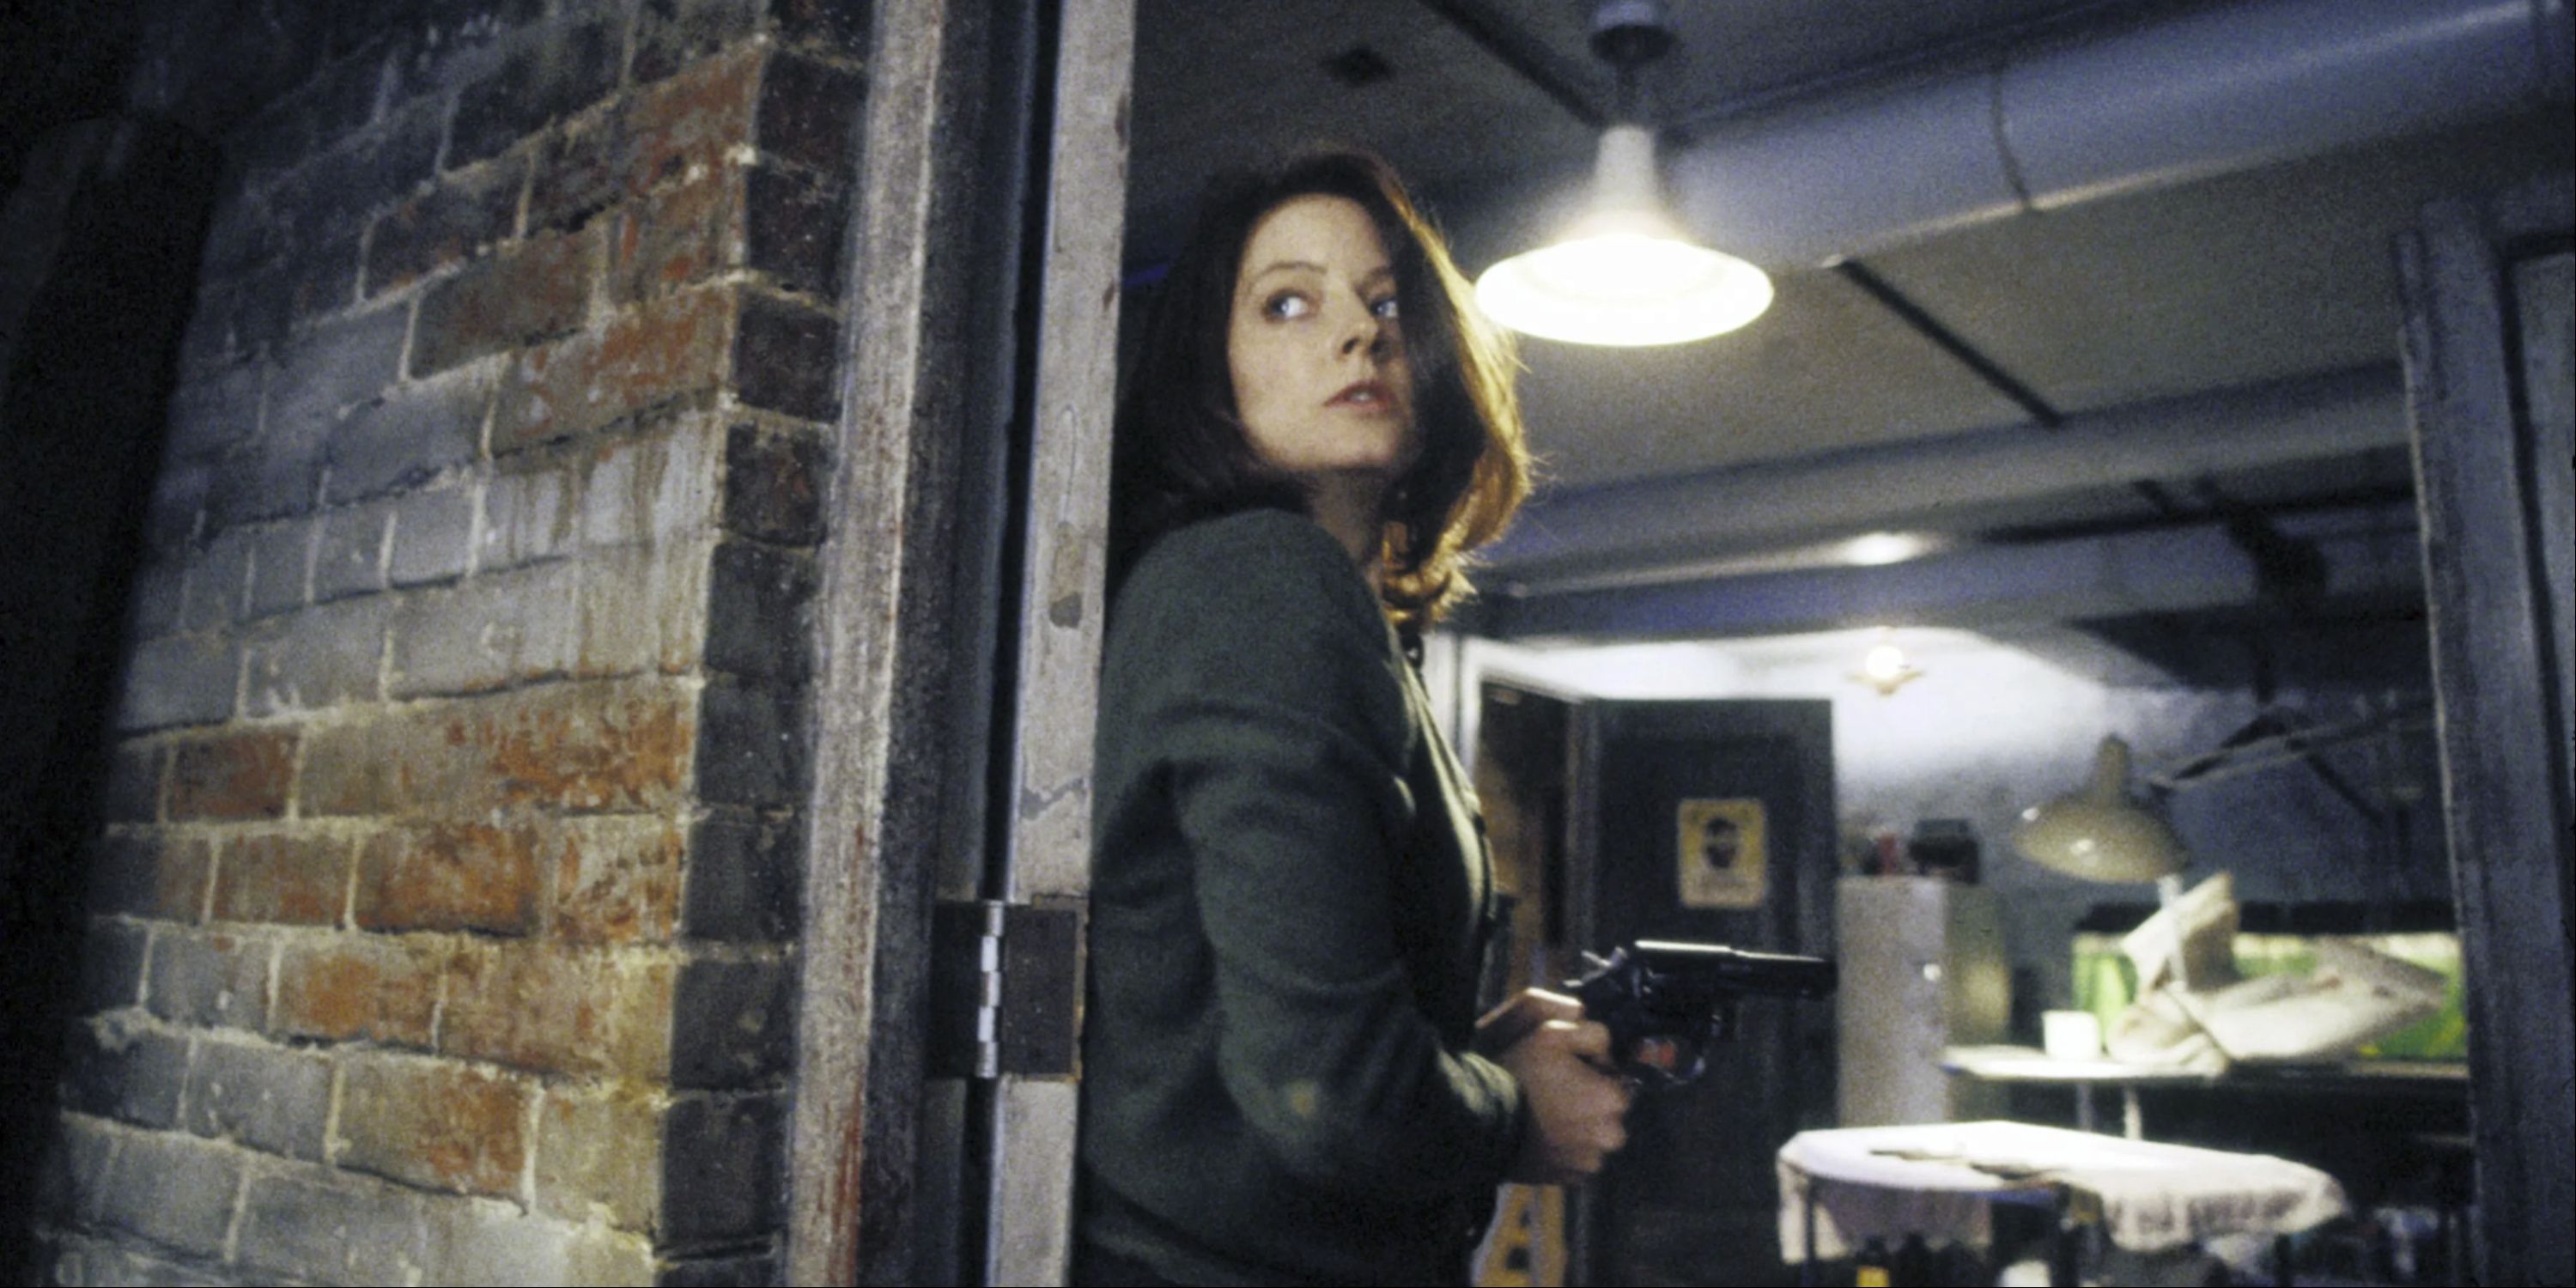 Jodie Foster as Clarice Starling in Silence of the Lambs